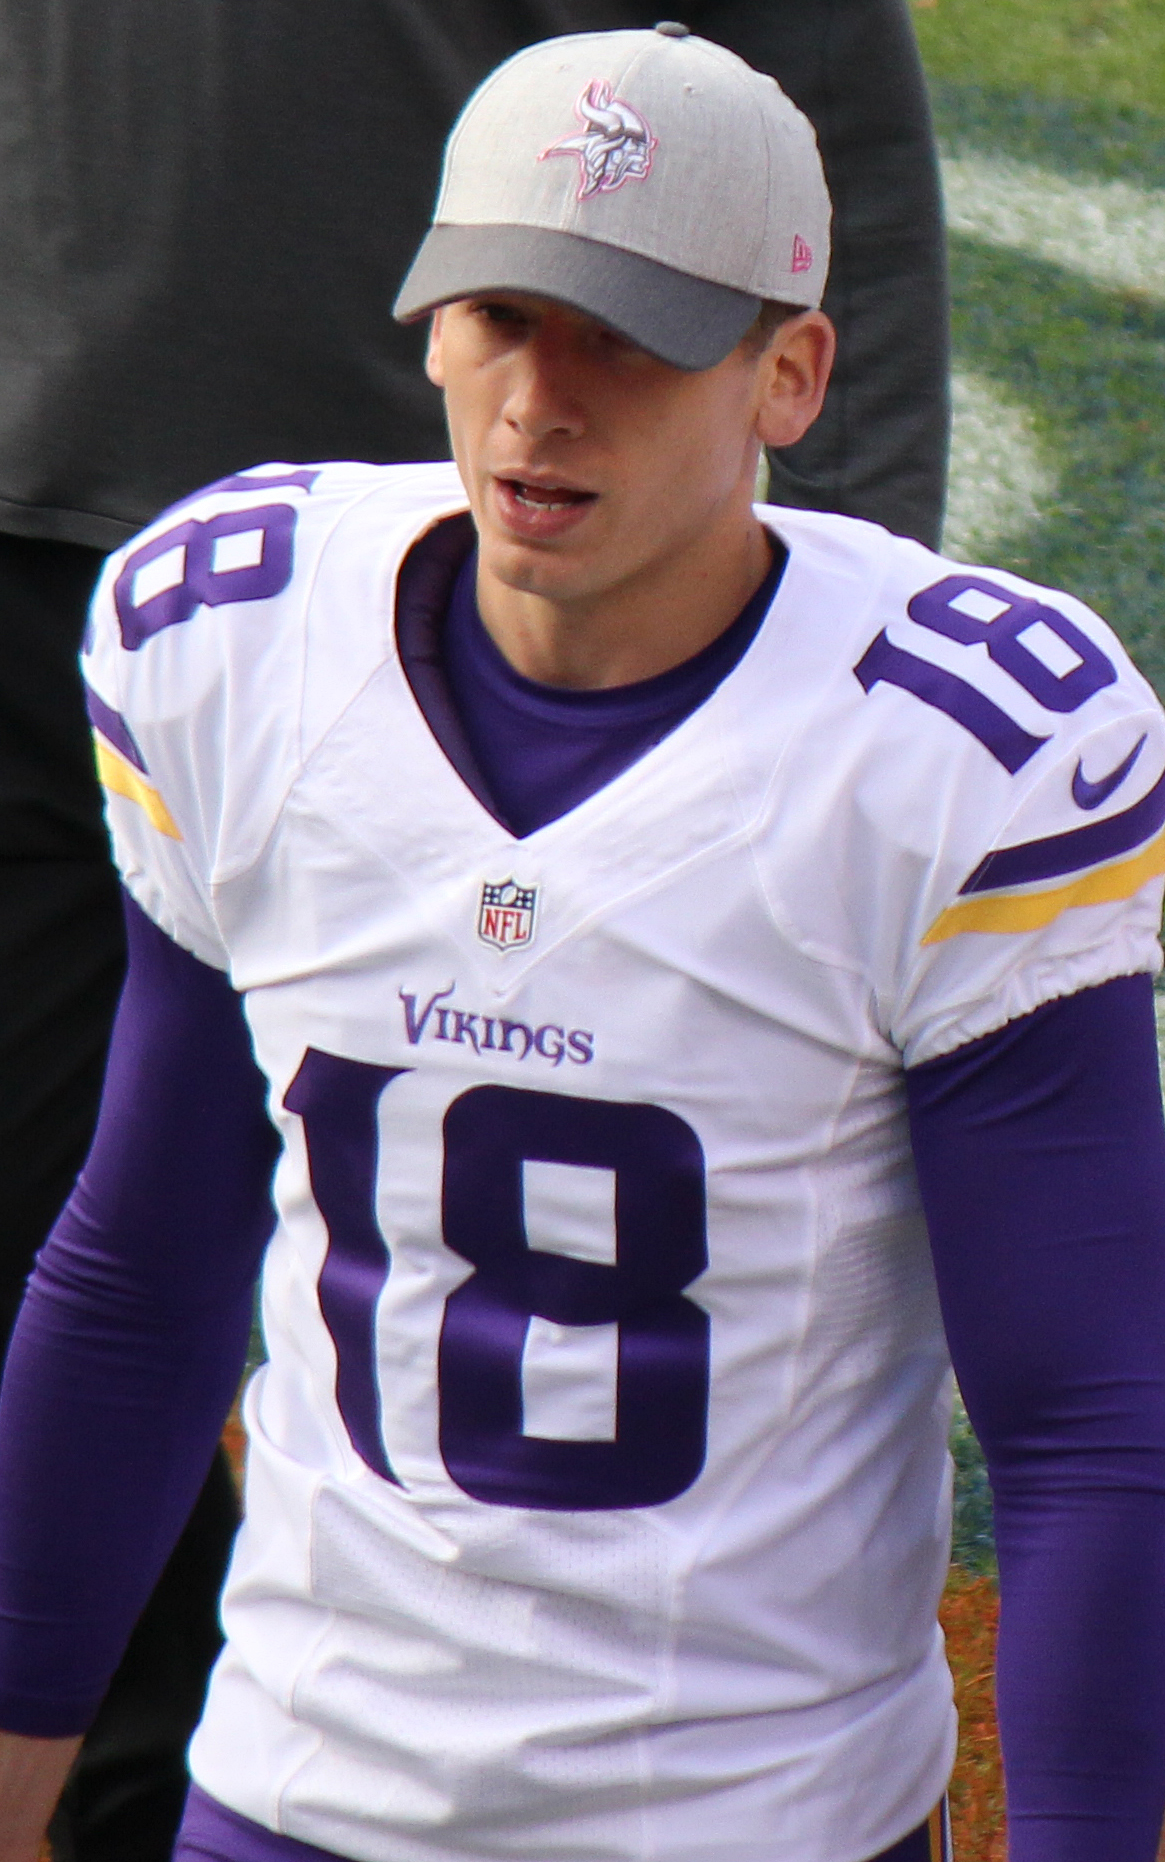 number 18 for the vikings